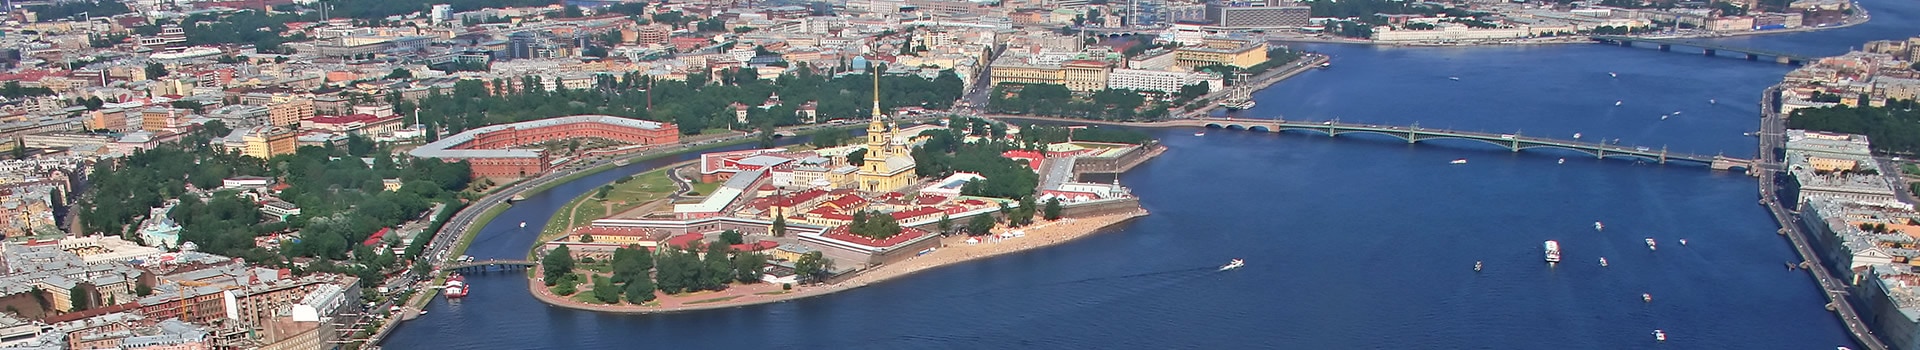 Moscow - St peterburg